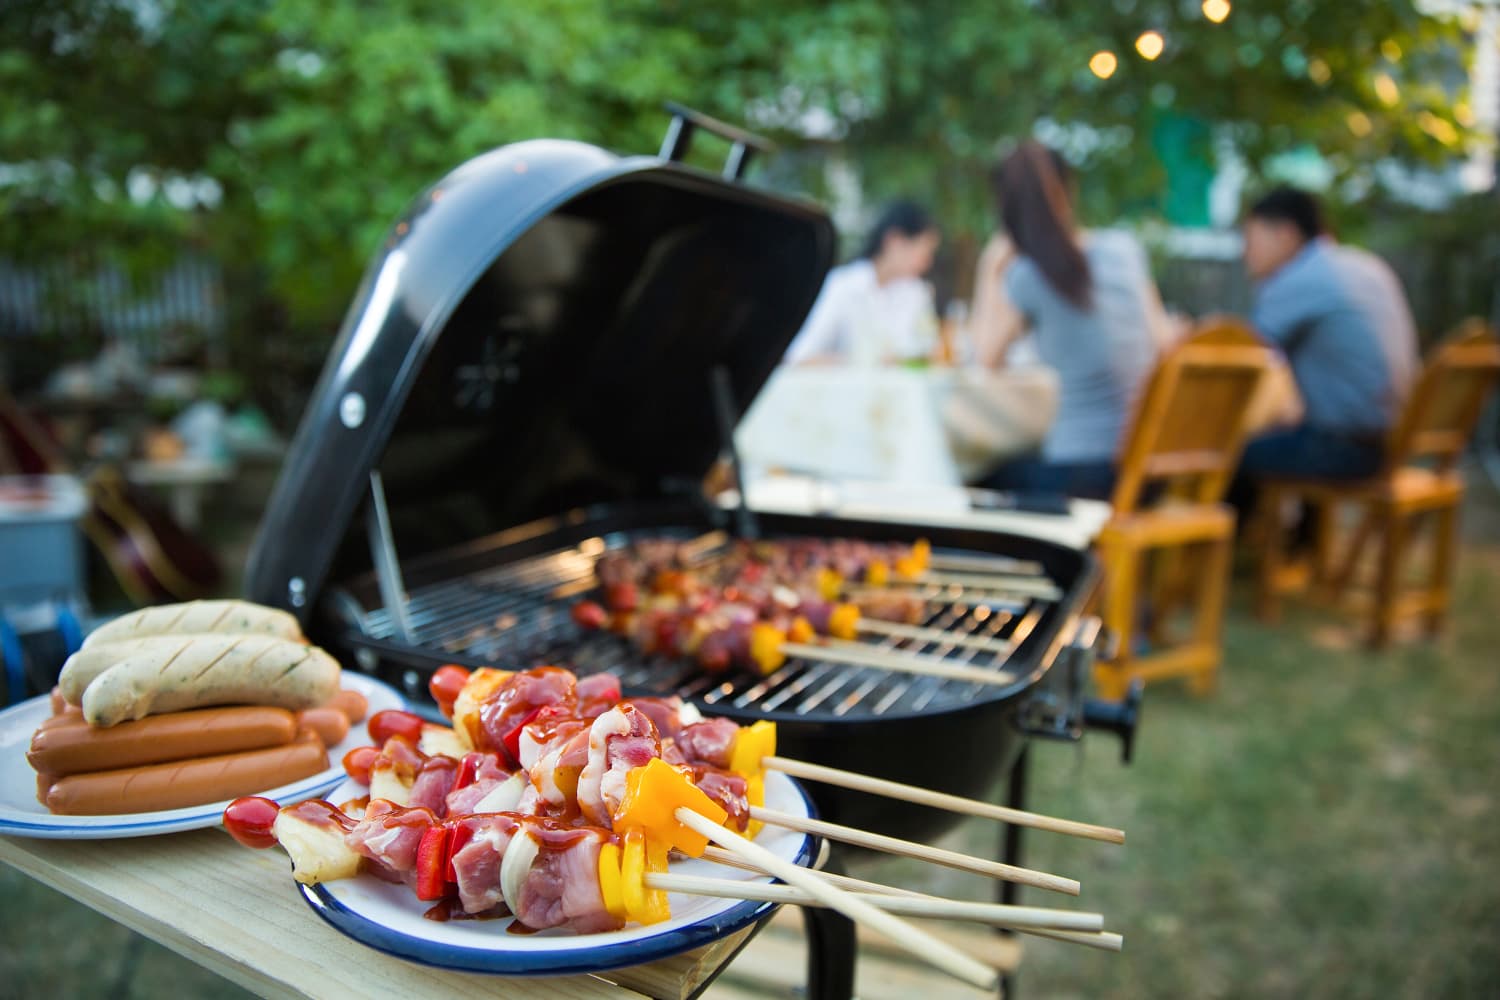 30 Best Grilling Gifts in 2023 for All Skill Levels